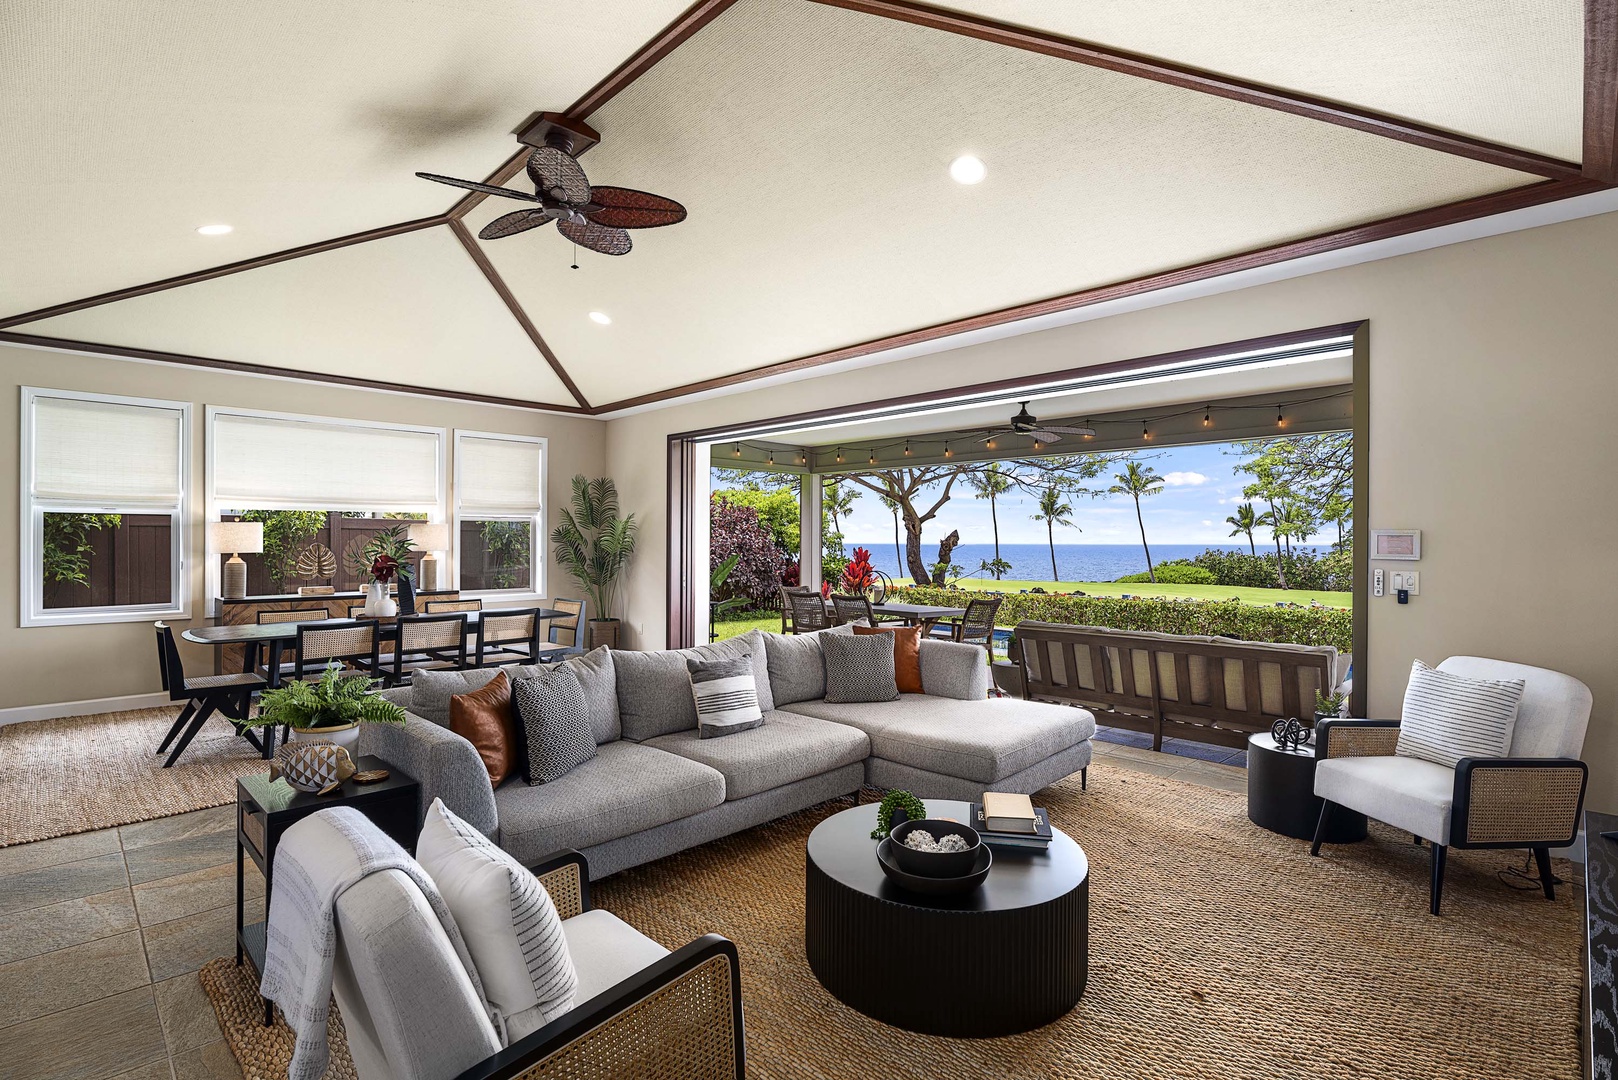 Kailua Kona Vacation Rentals, Holua Kai #27 - What better place to relax and enjoy this beautiful setting!